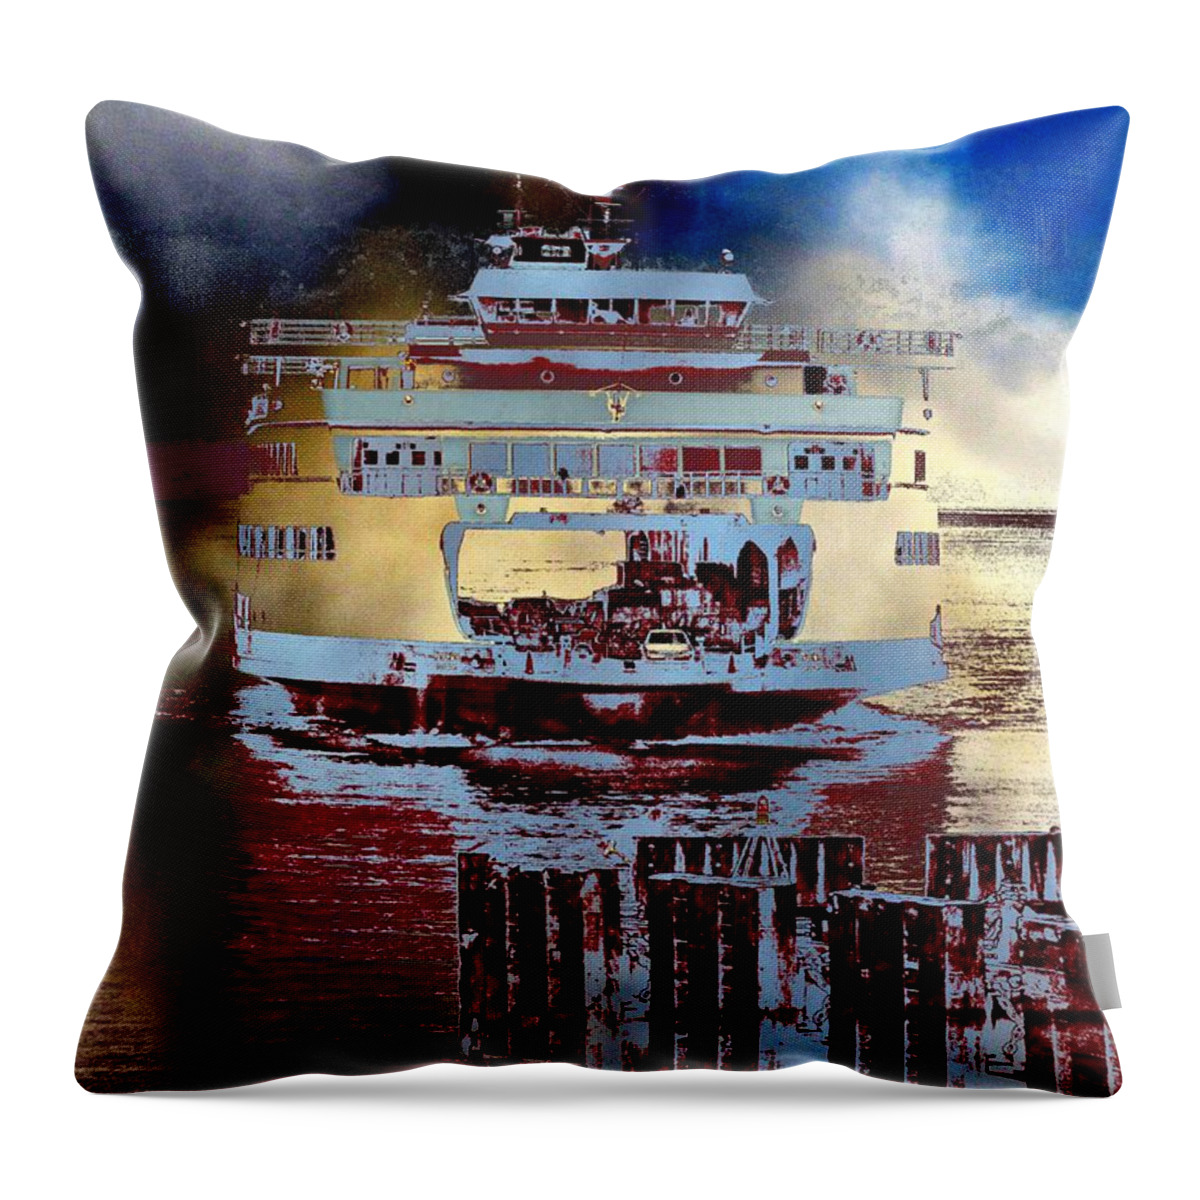 Seattle Throw Pillow featuring the photograph Now Arriving by Tim Allen